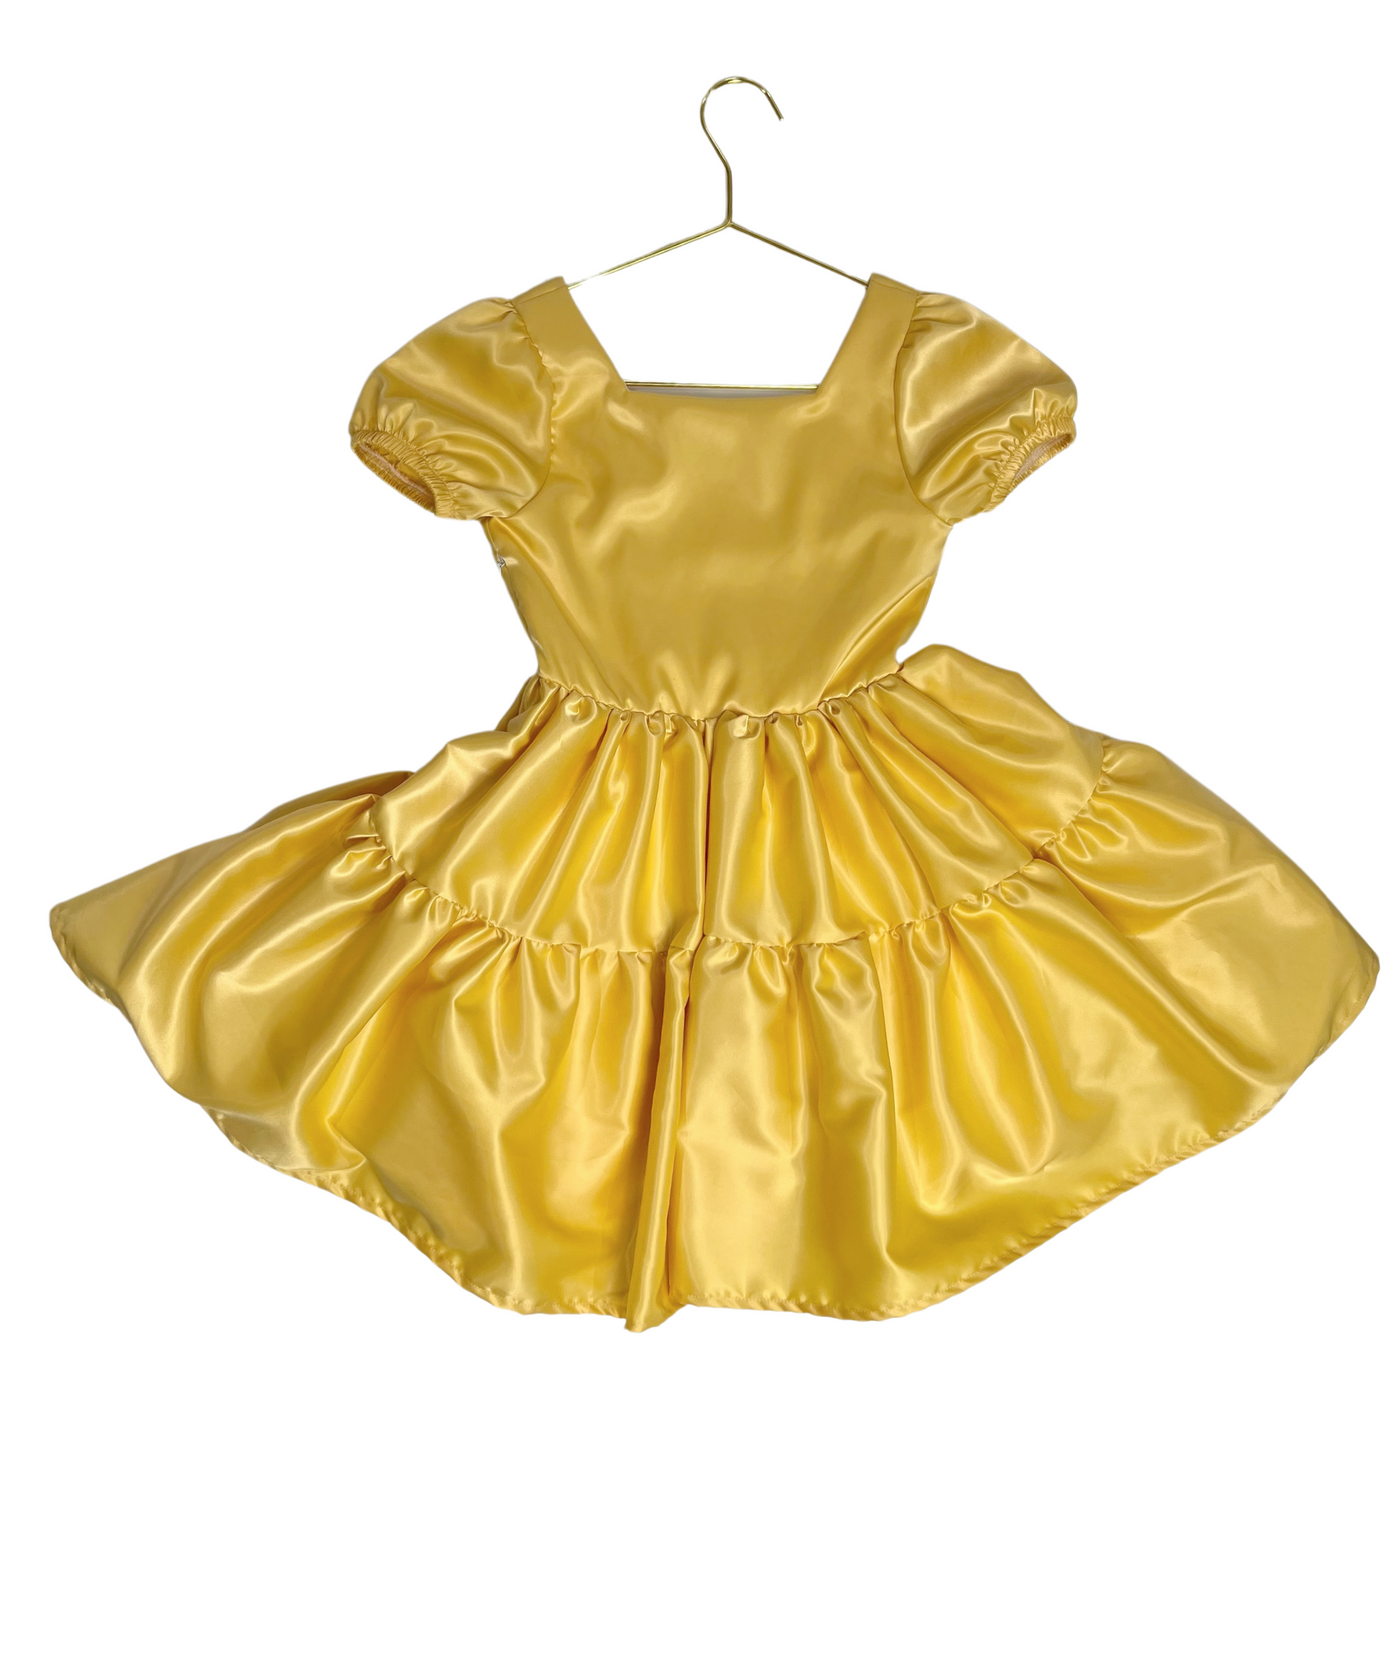 Once Upon a Twirl: Lily Pad Deluxe Princess Girls Dress